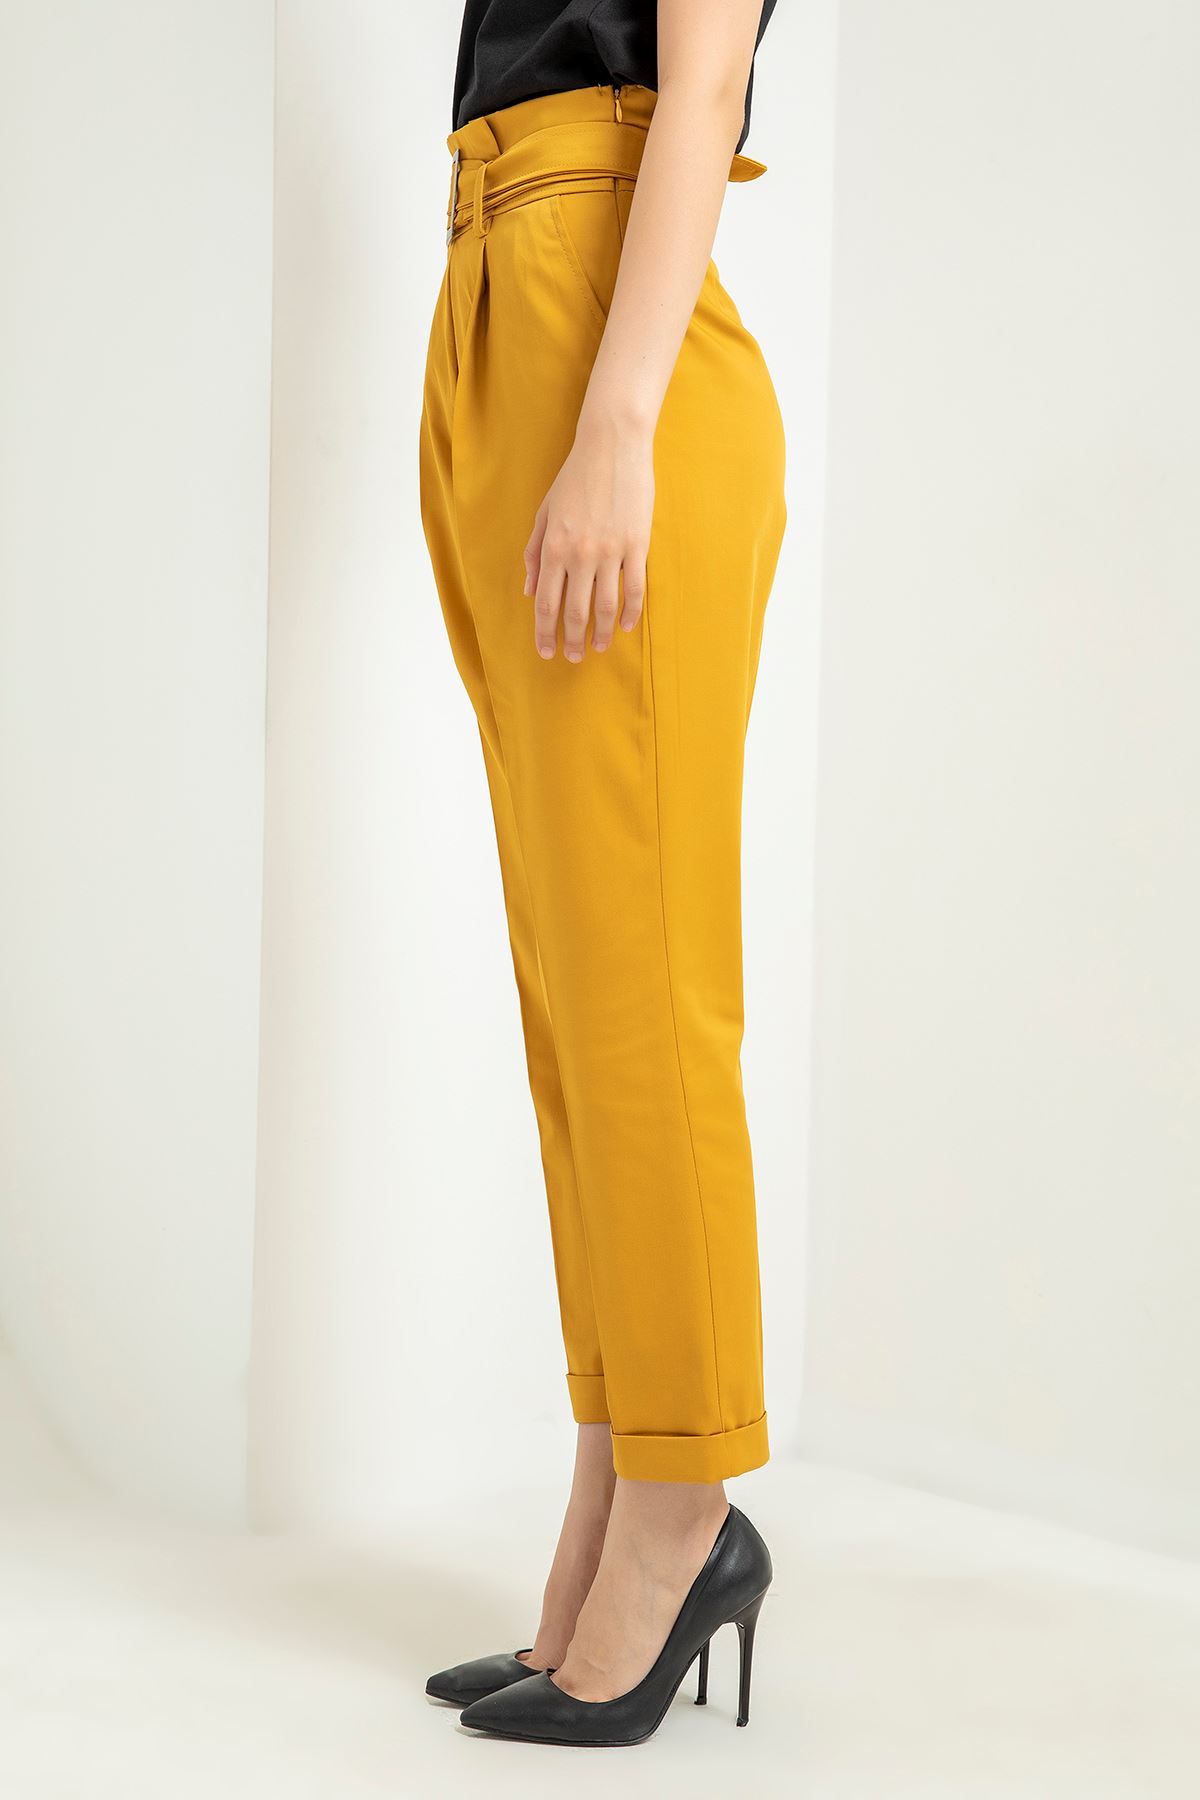 Erika Fabric Ankle Length Carrot Style Women'S Trouserwith Belt - Mustard